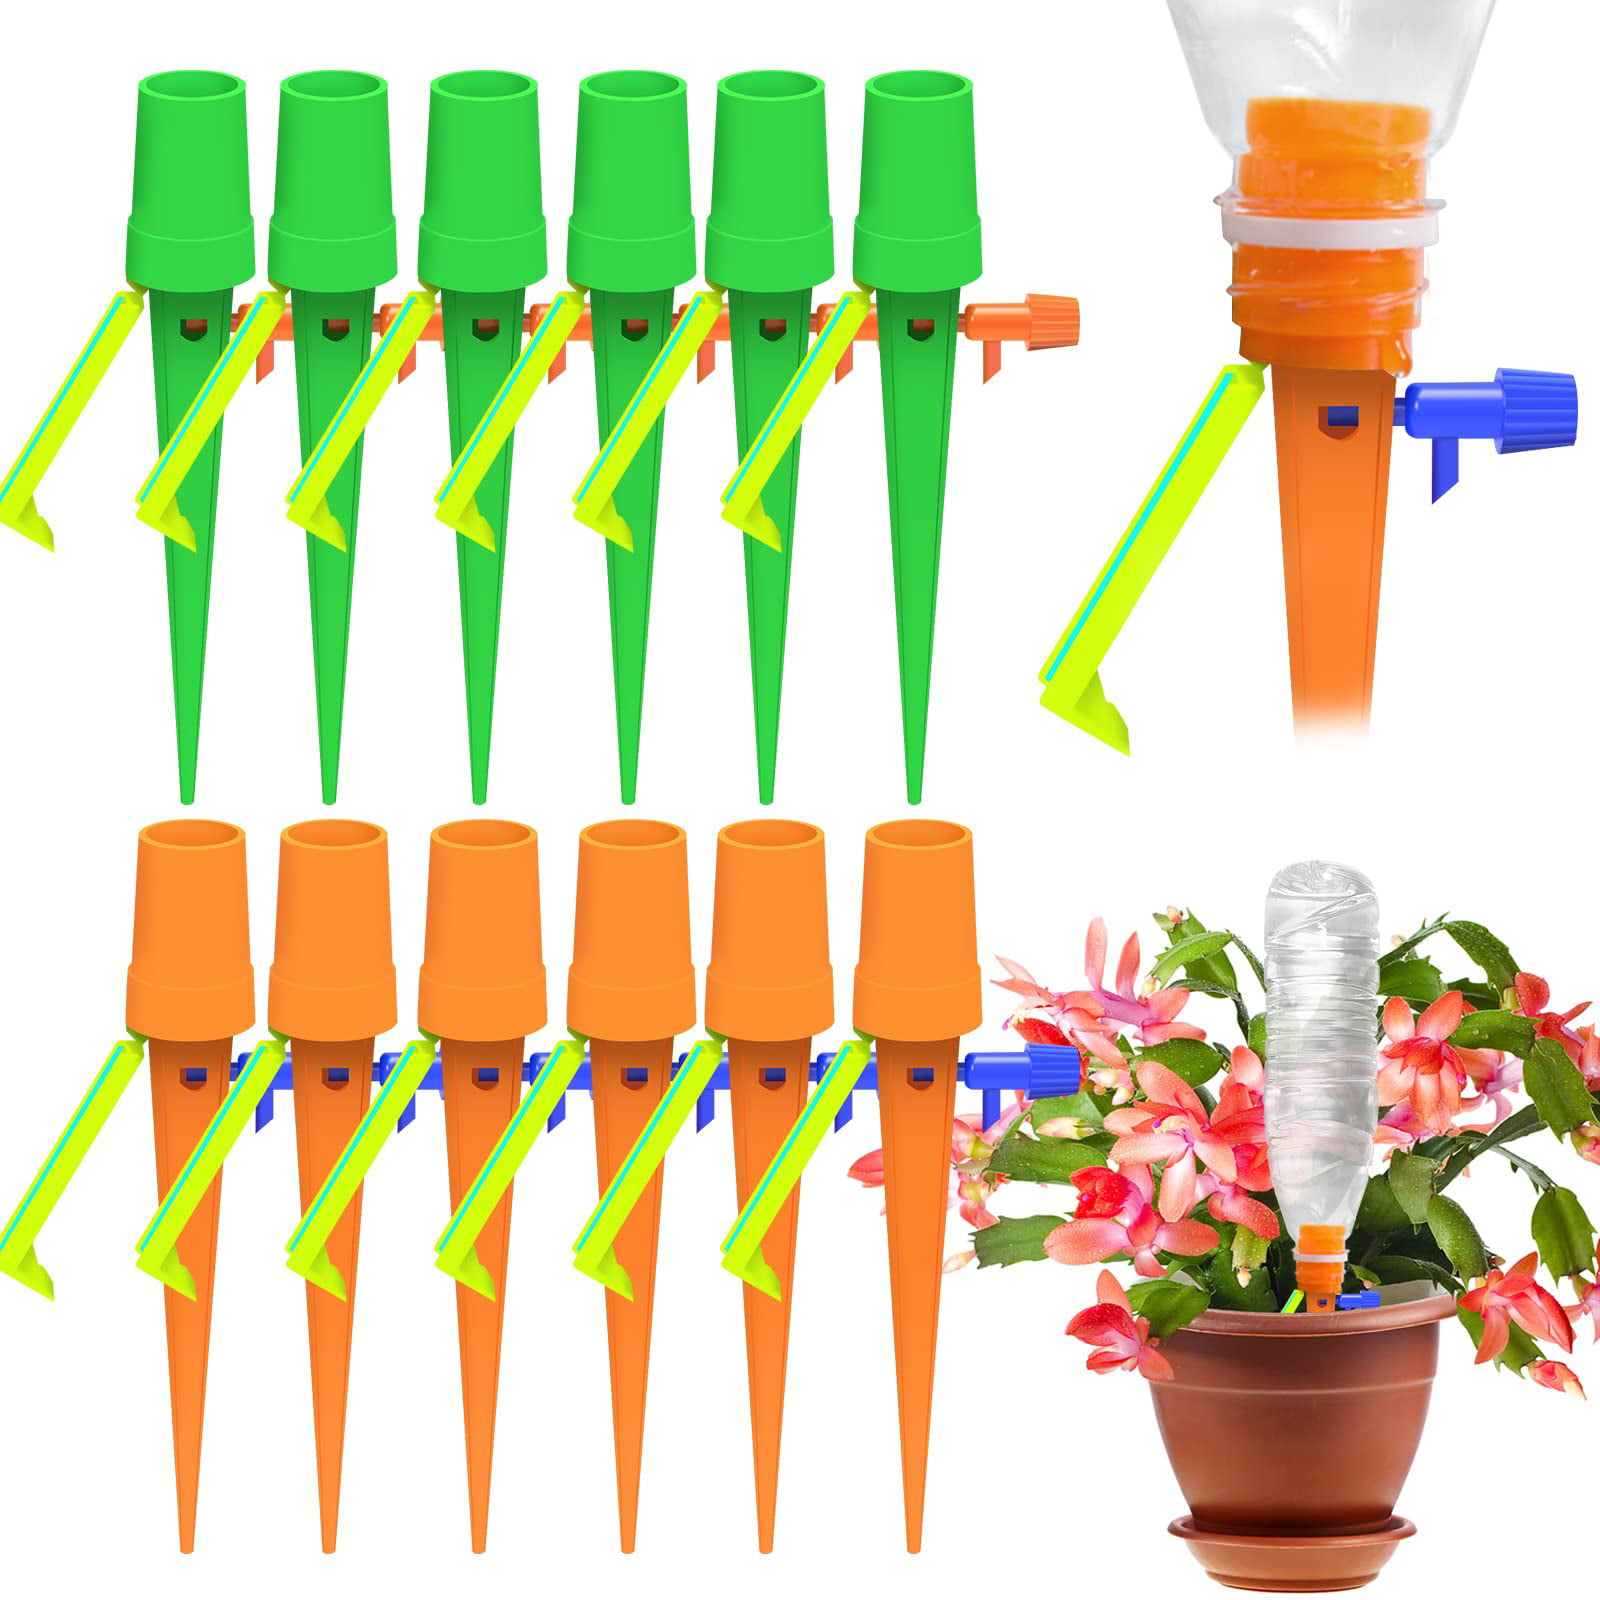 Indoor Outdoor Plastic Bottle Automatic Garden Plants Drip Irrigation Slow Release System/Works as Watering Bulbs or Globes Stakes with Screw Valve-12 Pack Adjustable Self Plant Watering Spikes 